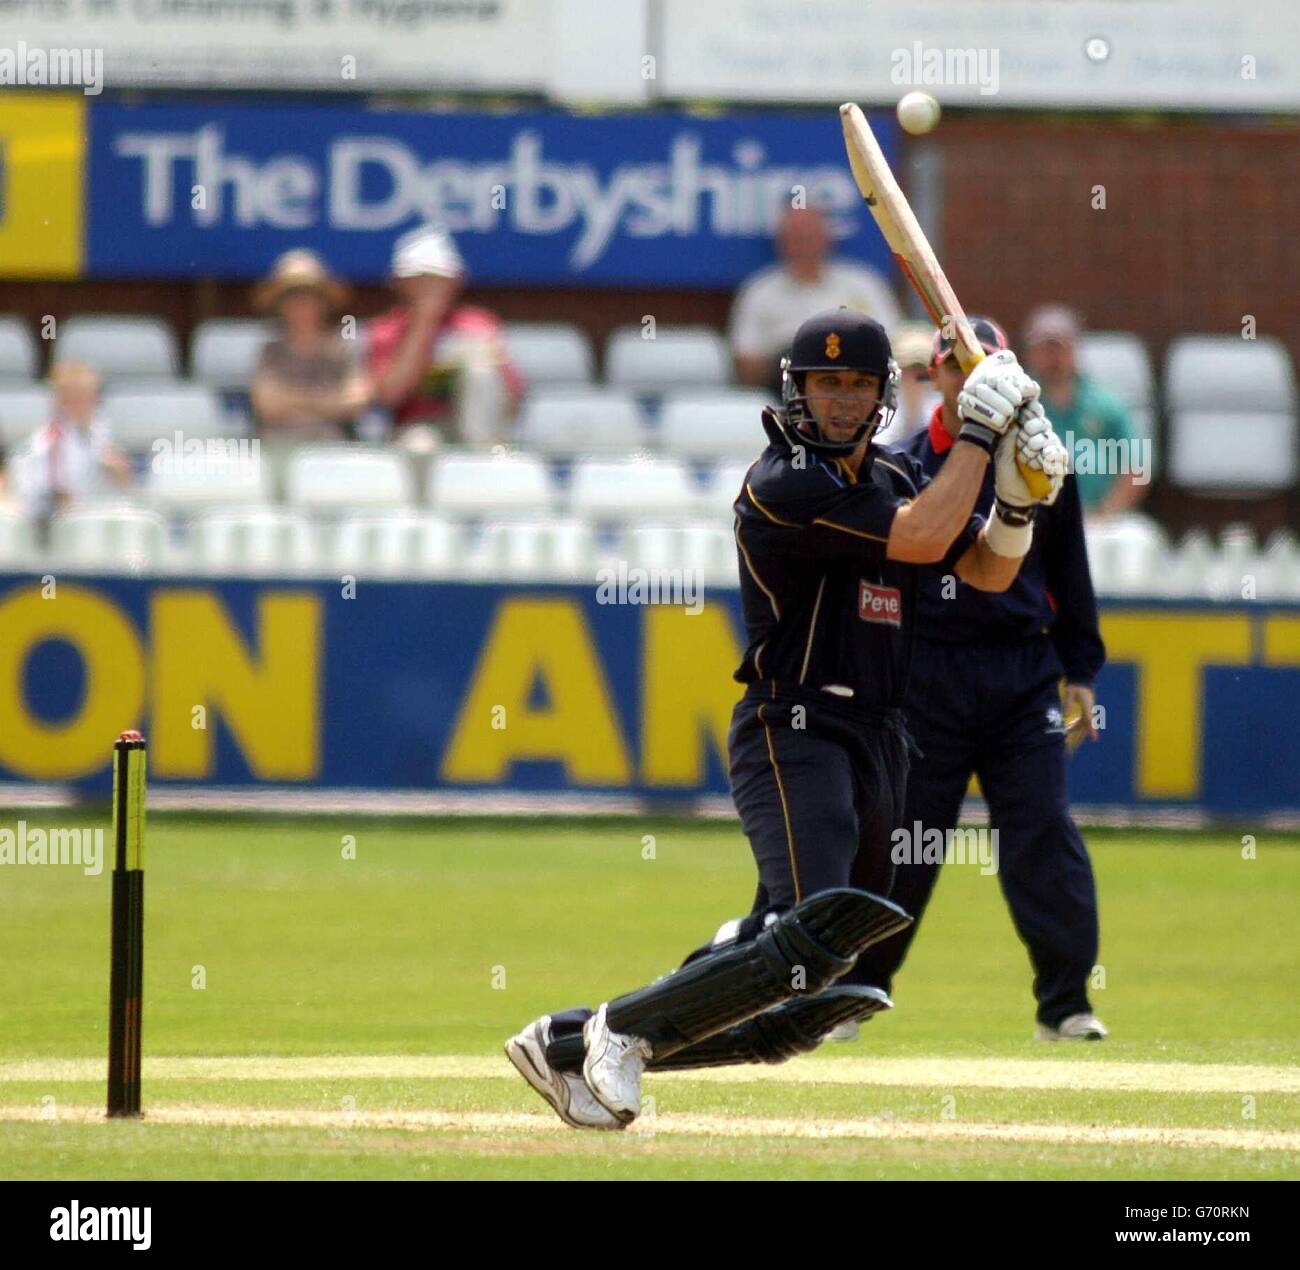 Jonathan Moss of Derbyshire hits a boundary off MIddlesex bowler Nantie Hayward during the Totesport League Division Two match at the County Ground, Derby. Stock Photo